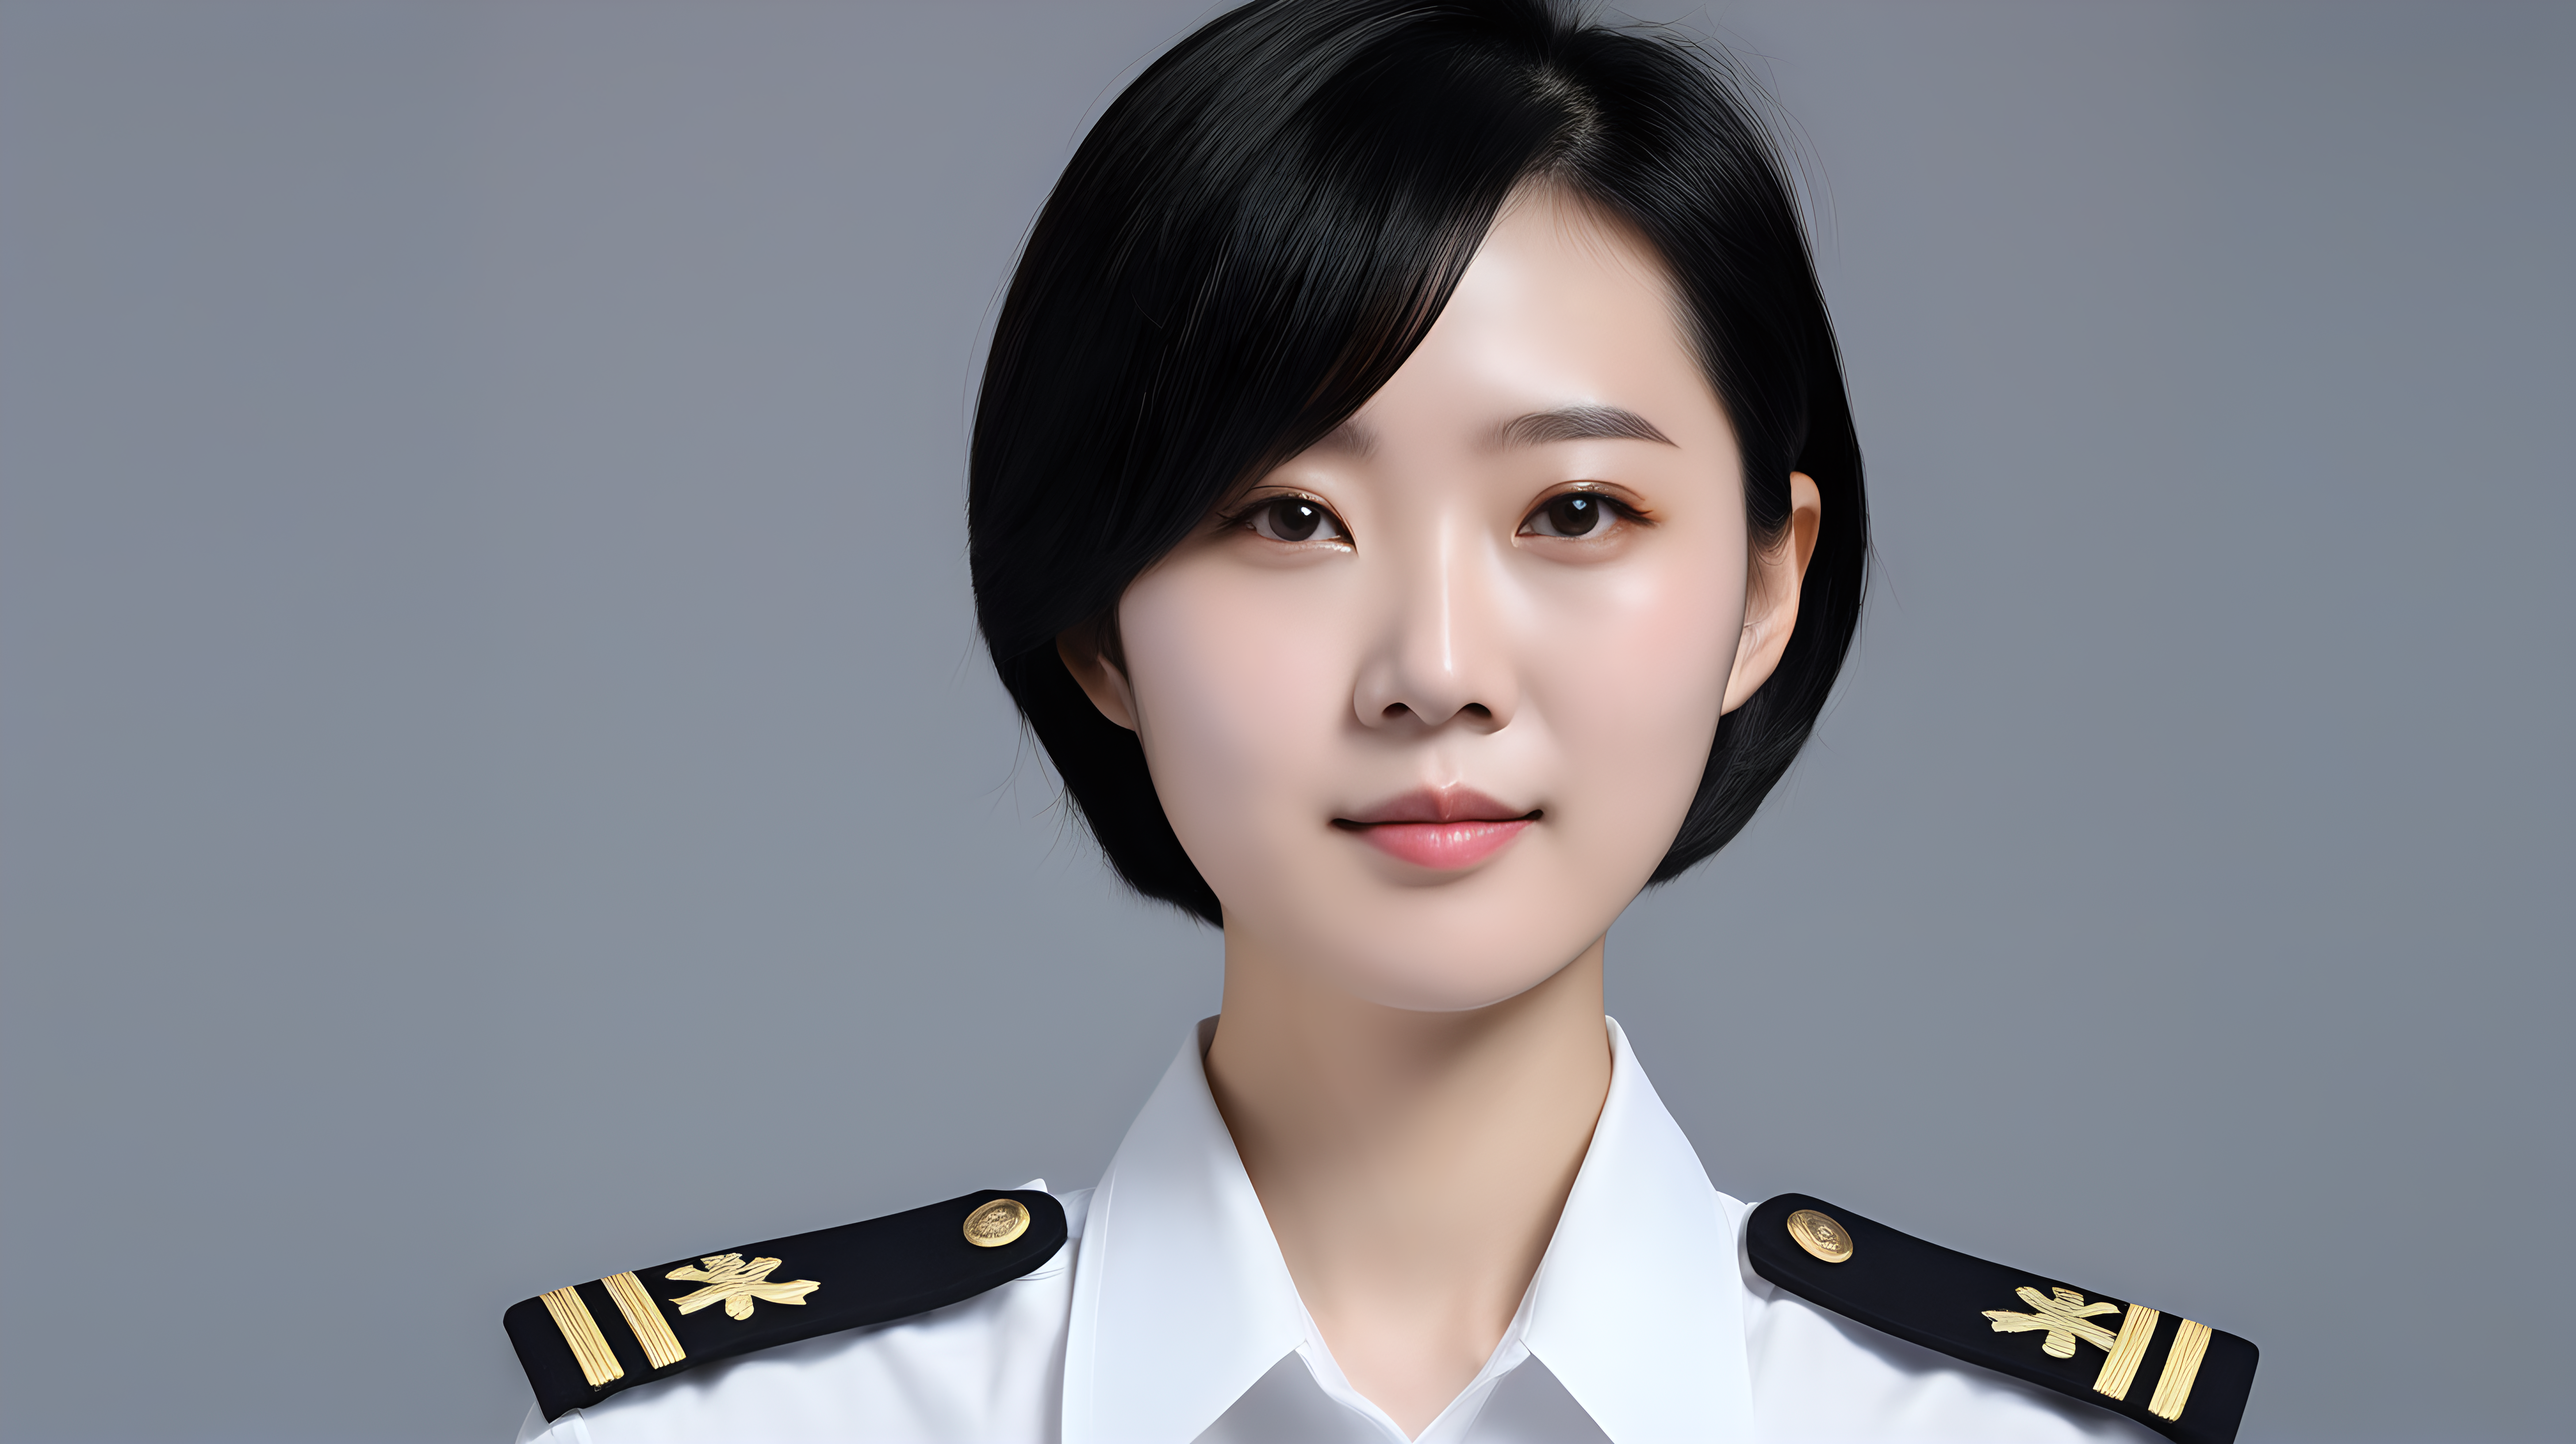 A Chinese navy female soldierYouthShort hairBlack hairWhite shirtFrontal